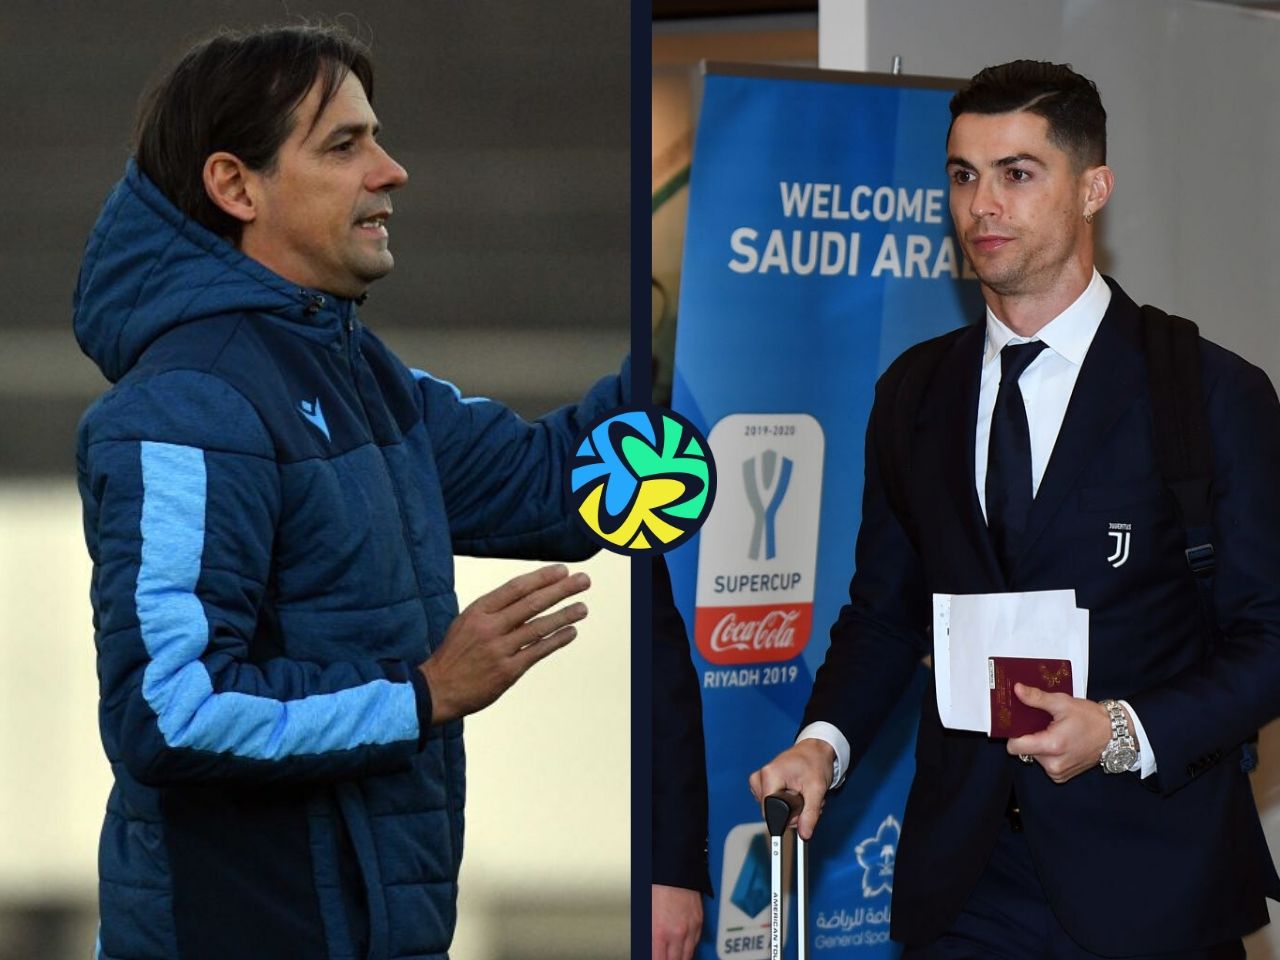 Inzaghi lauds Ronaldo He is a champion